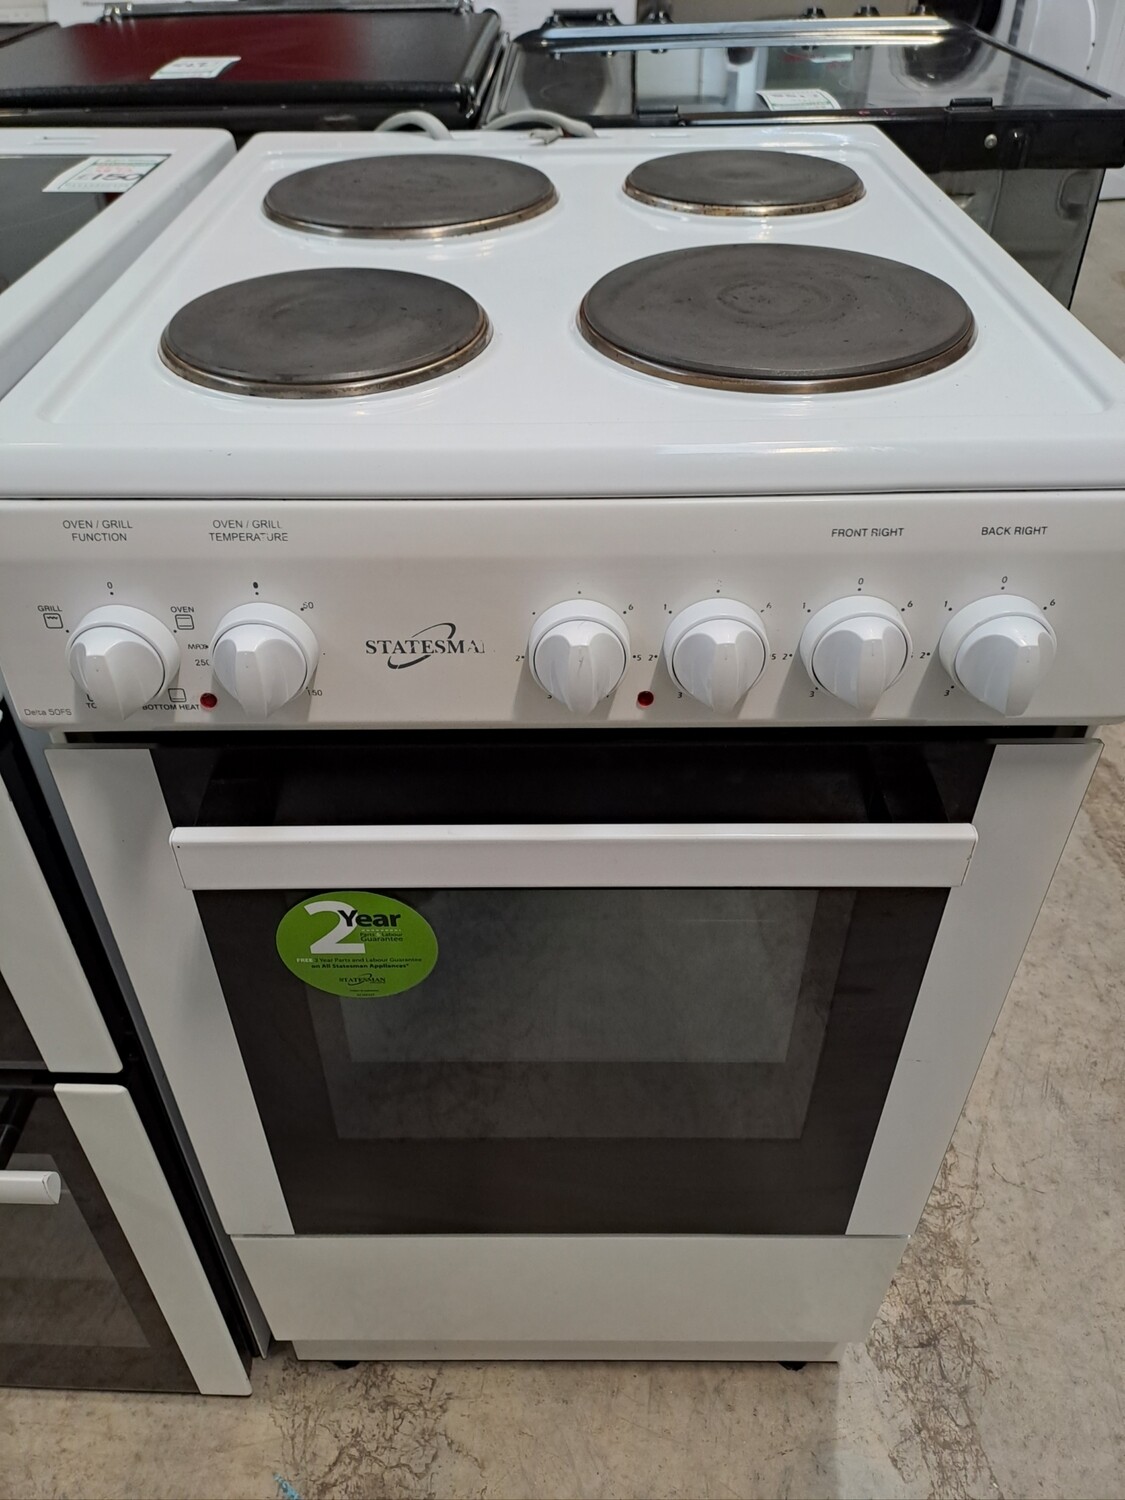 Statesman Delta 50FS 50cm Electric cooker Solid Hob - White - Refurbished 6 Month Guarantee 